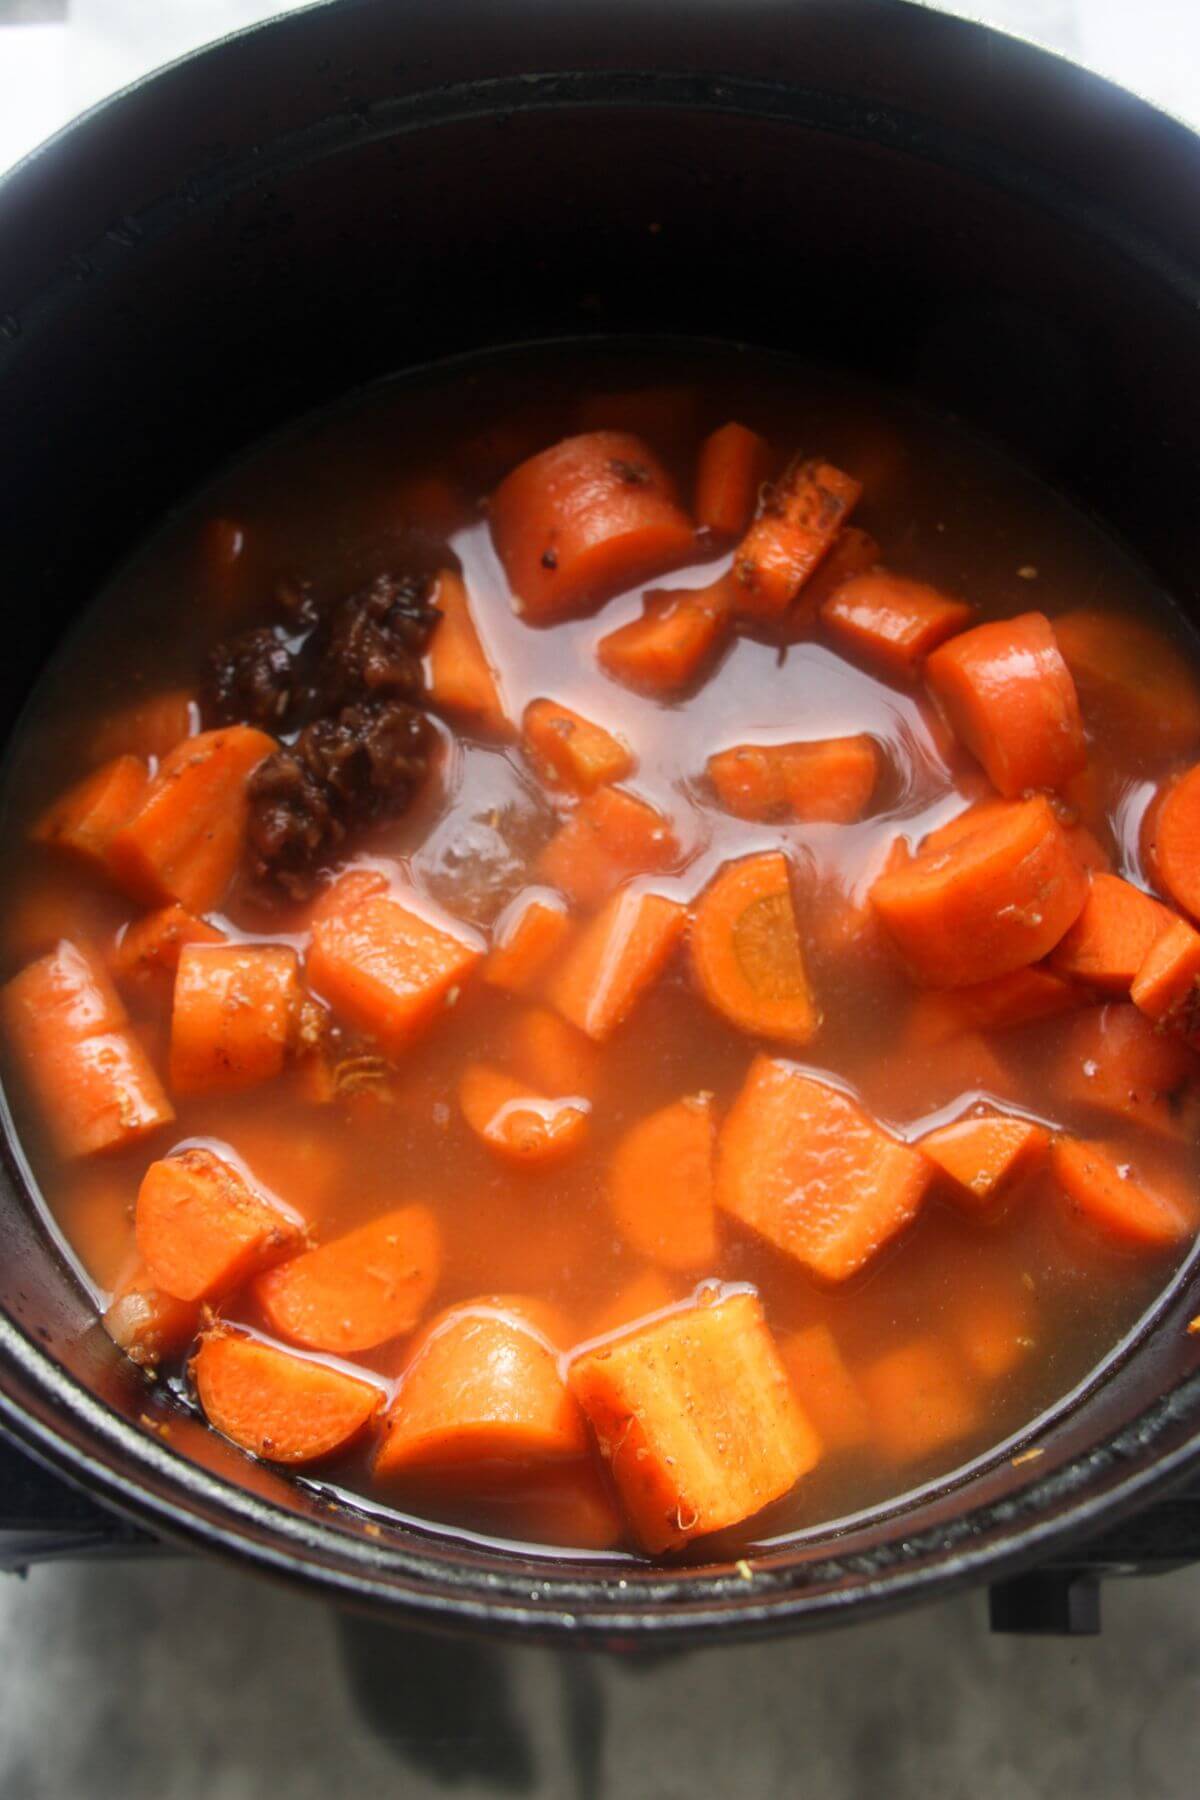 Stock added to a large black pot with chopped carrots in it.